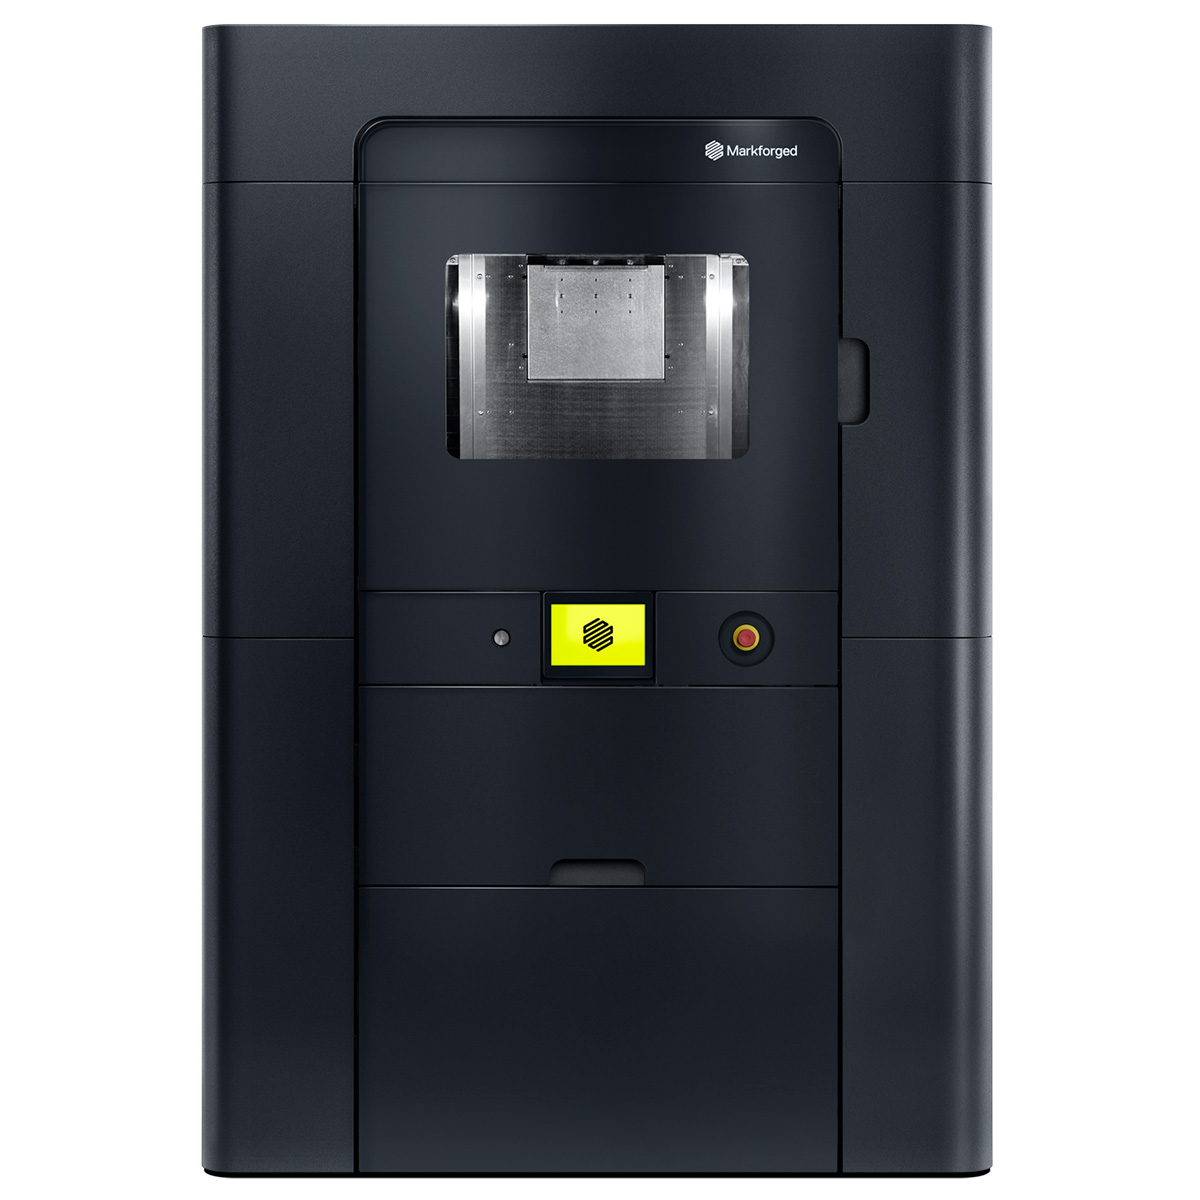 Markforged FX20 product